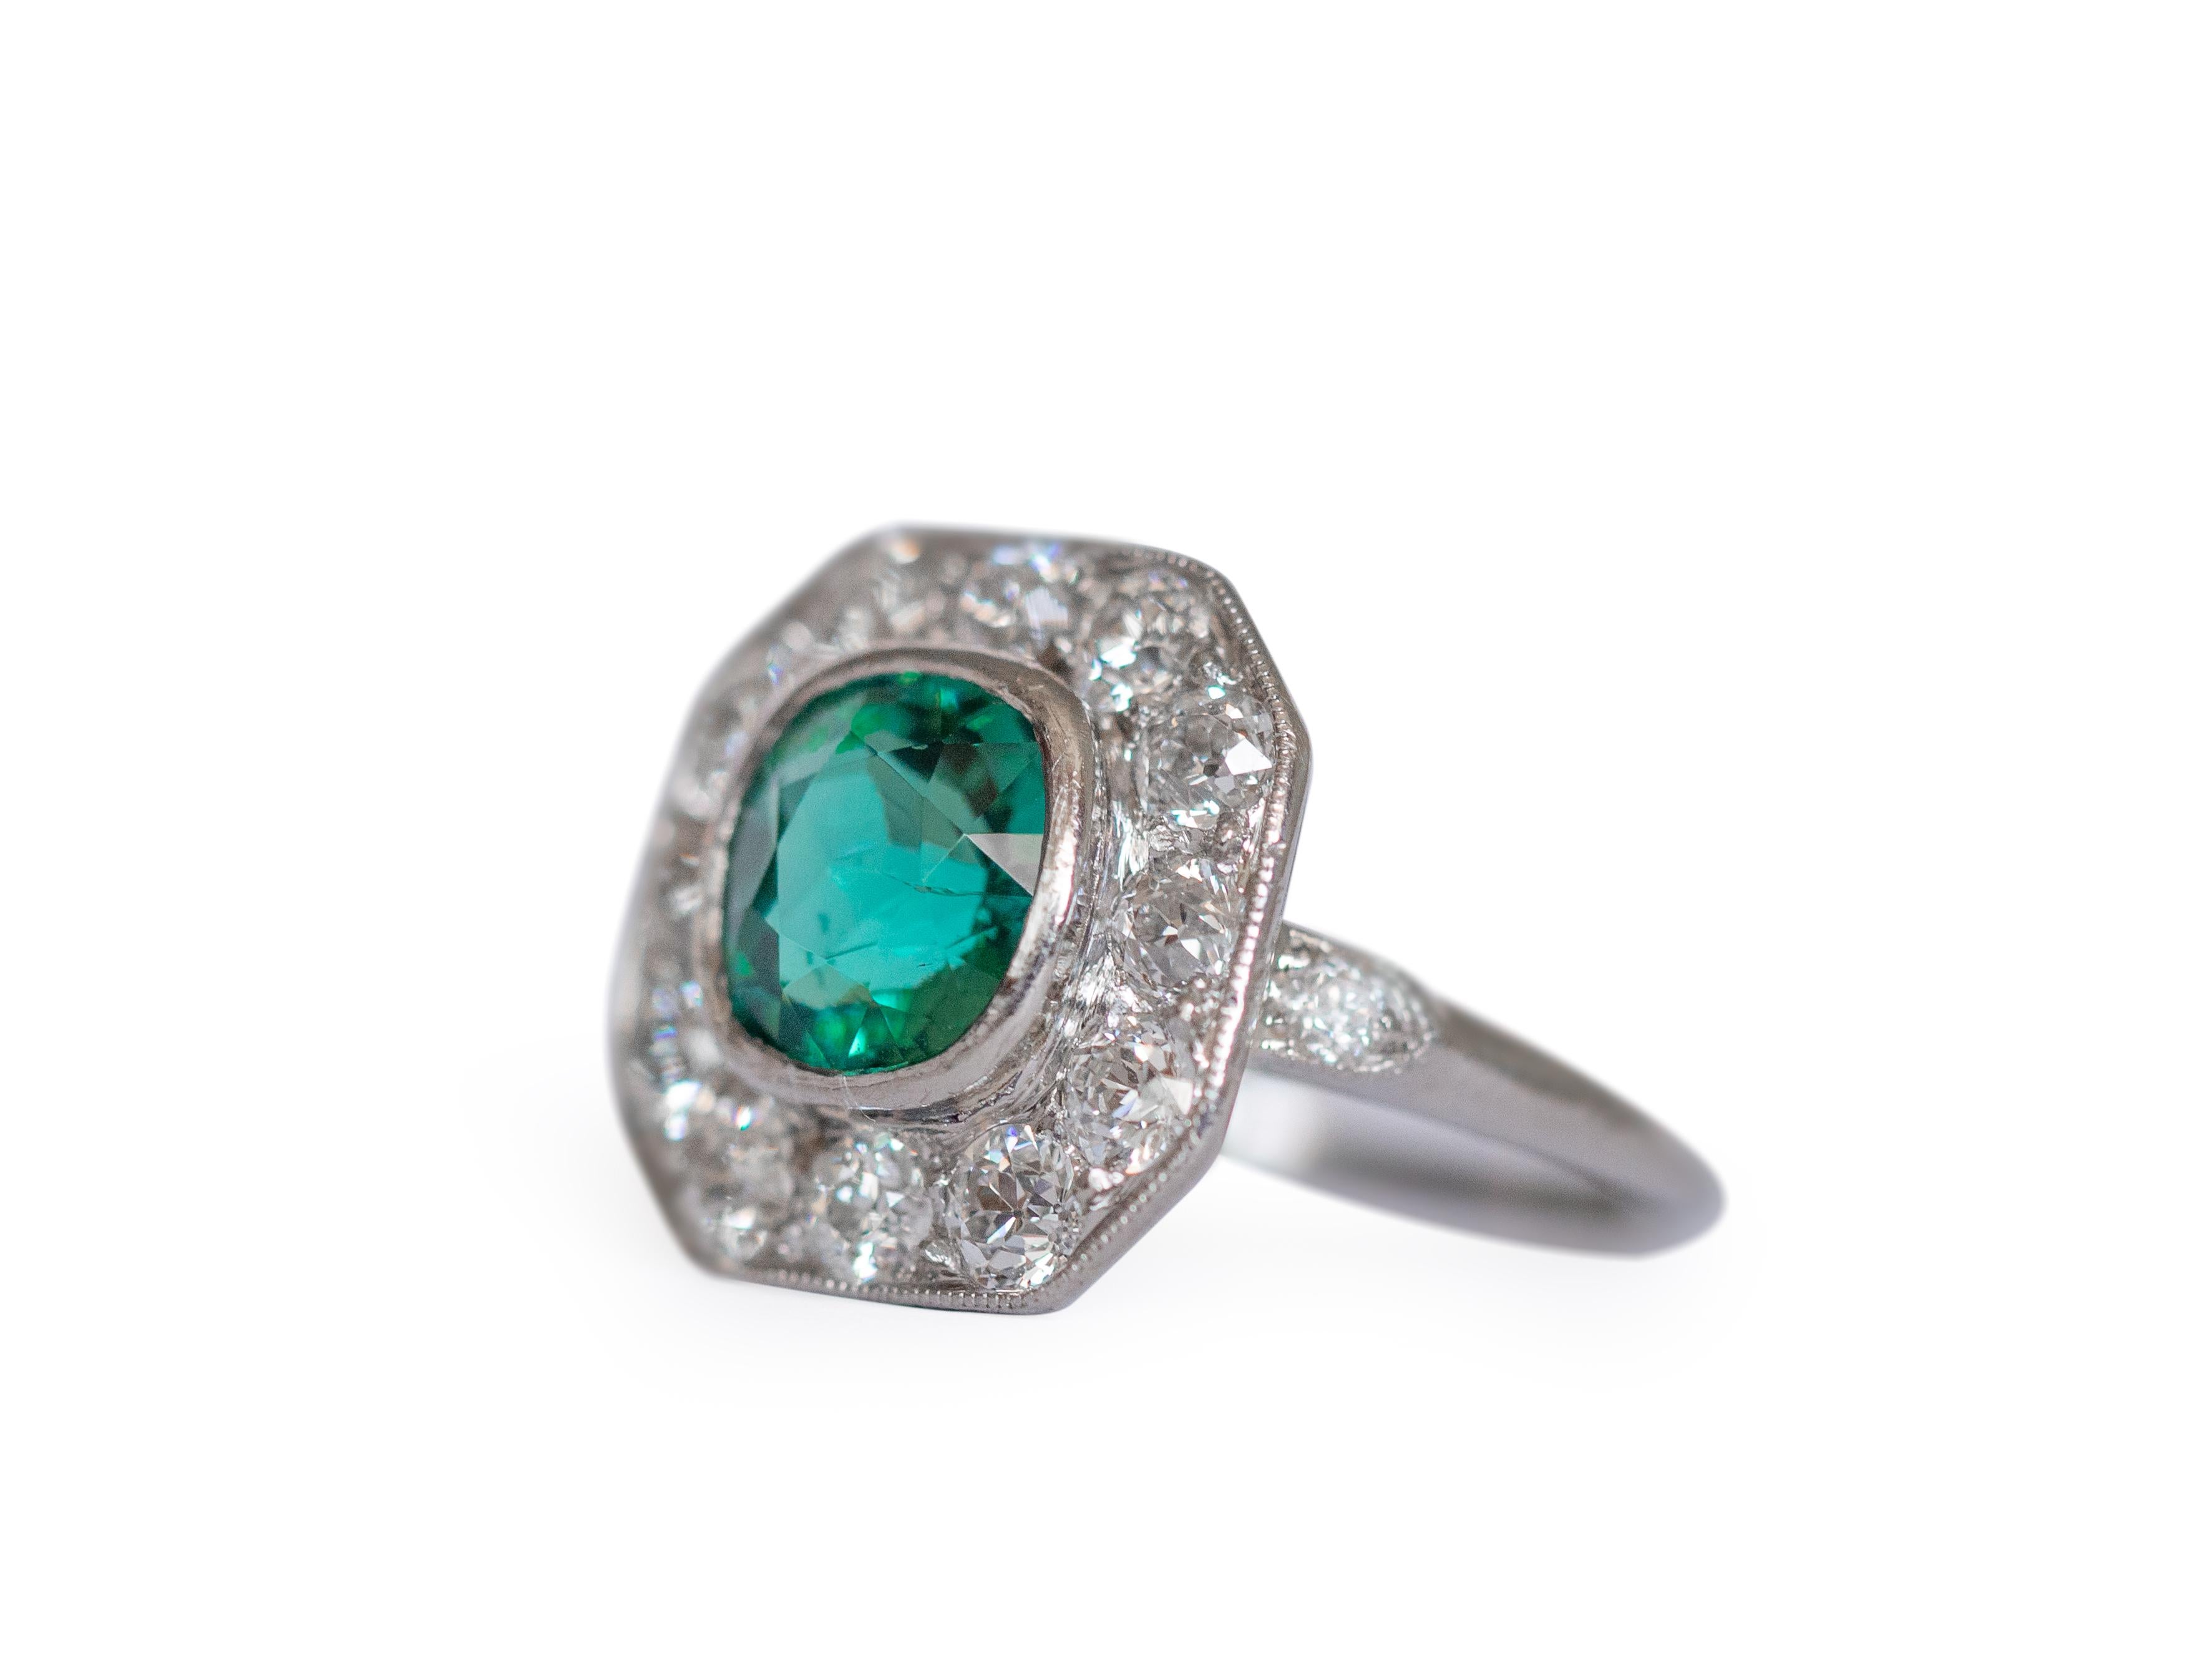 This is a gorgeous example of an Art Deco era tourmaline ring! The gorgeous antique cushion cut tourmaline is a fantastic shade of greenish-blue very similar to the coveted 